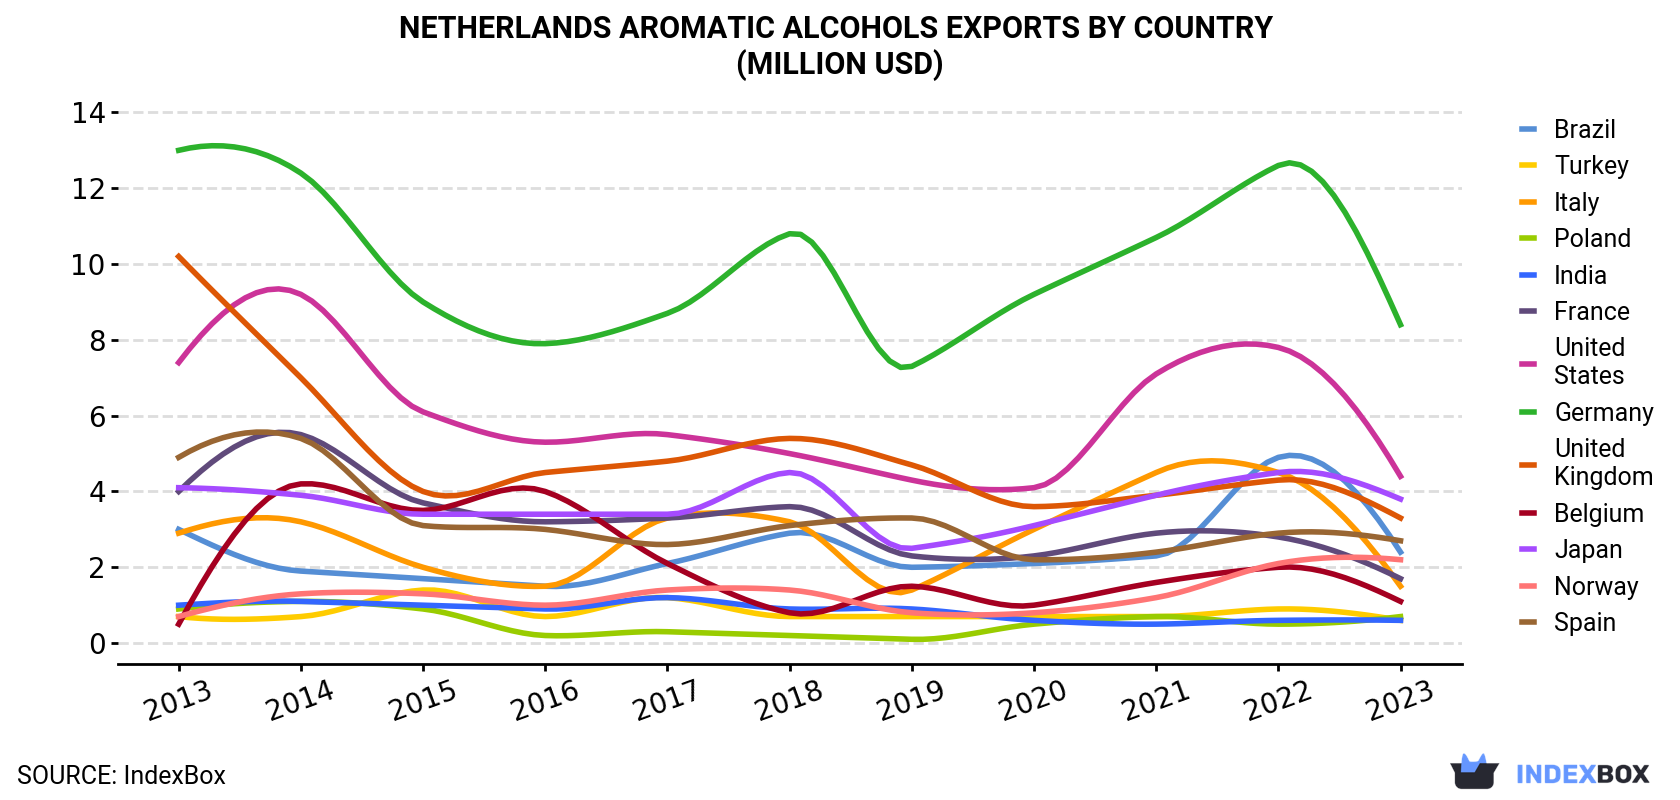 Netherlands Aromatic Alcohols Exports By Country (Million USD)